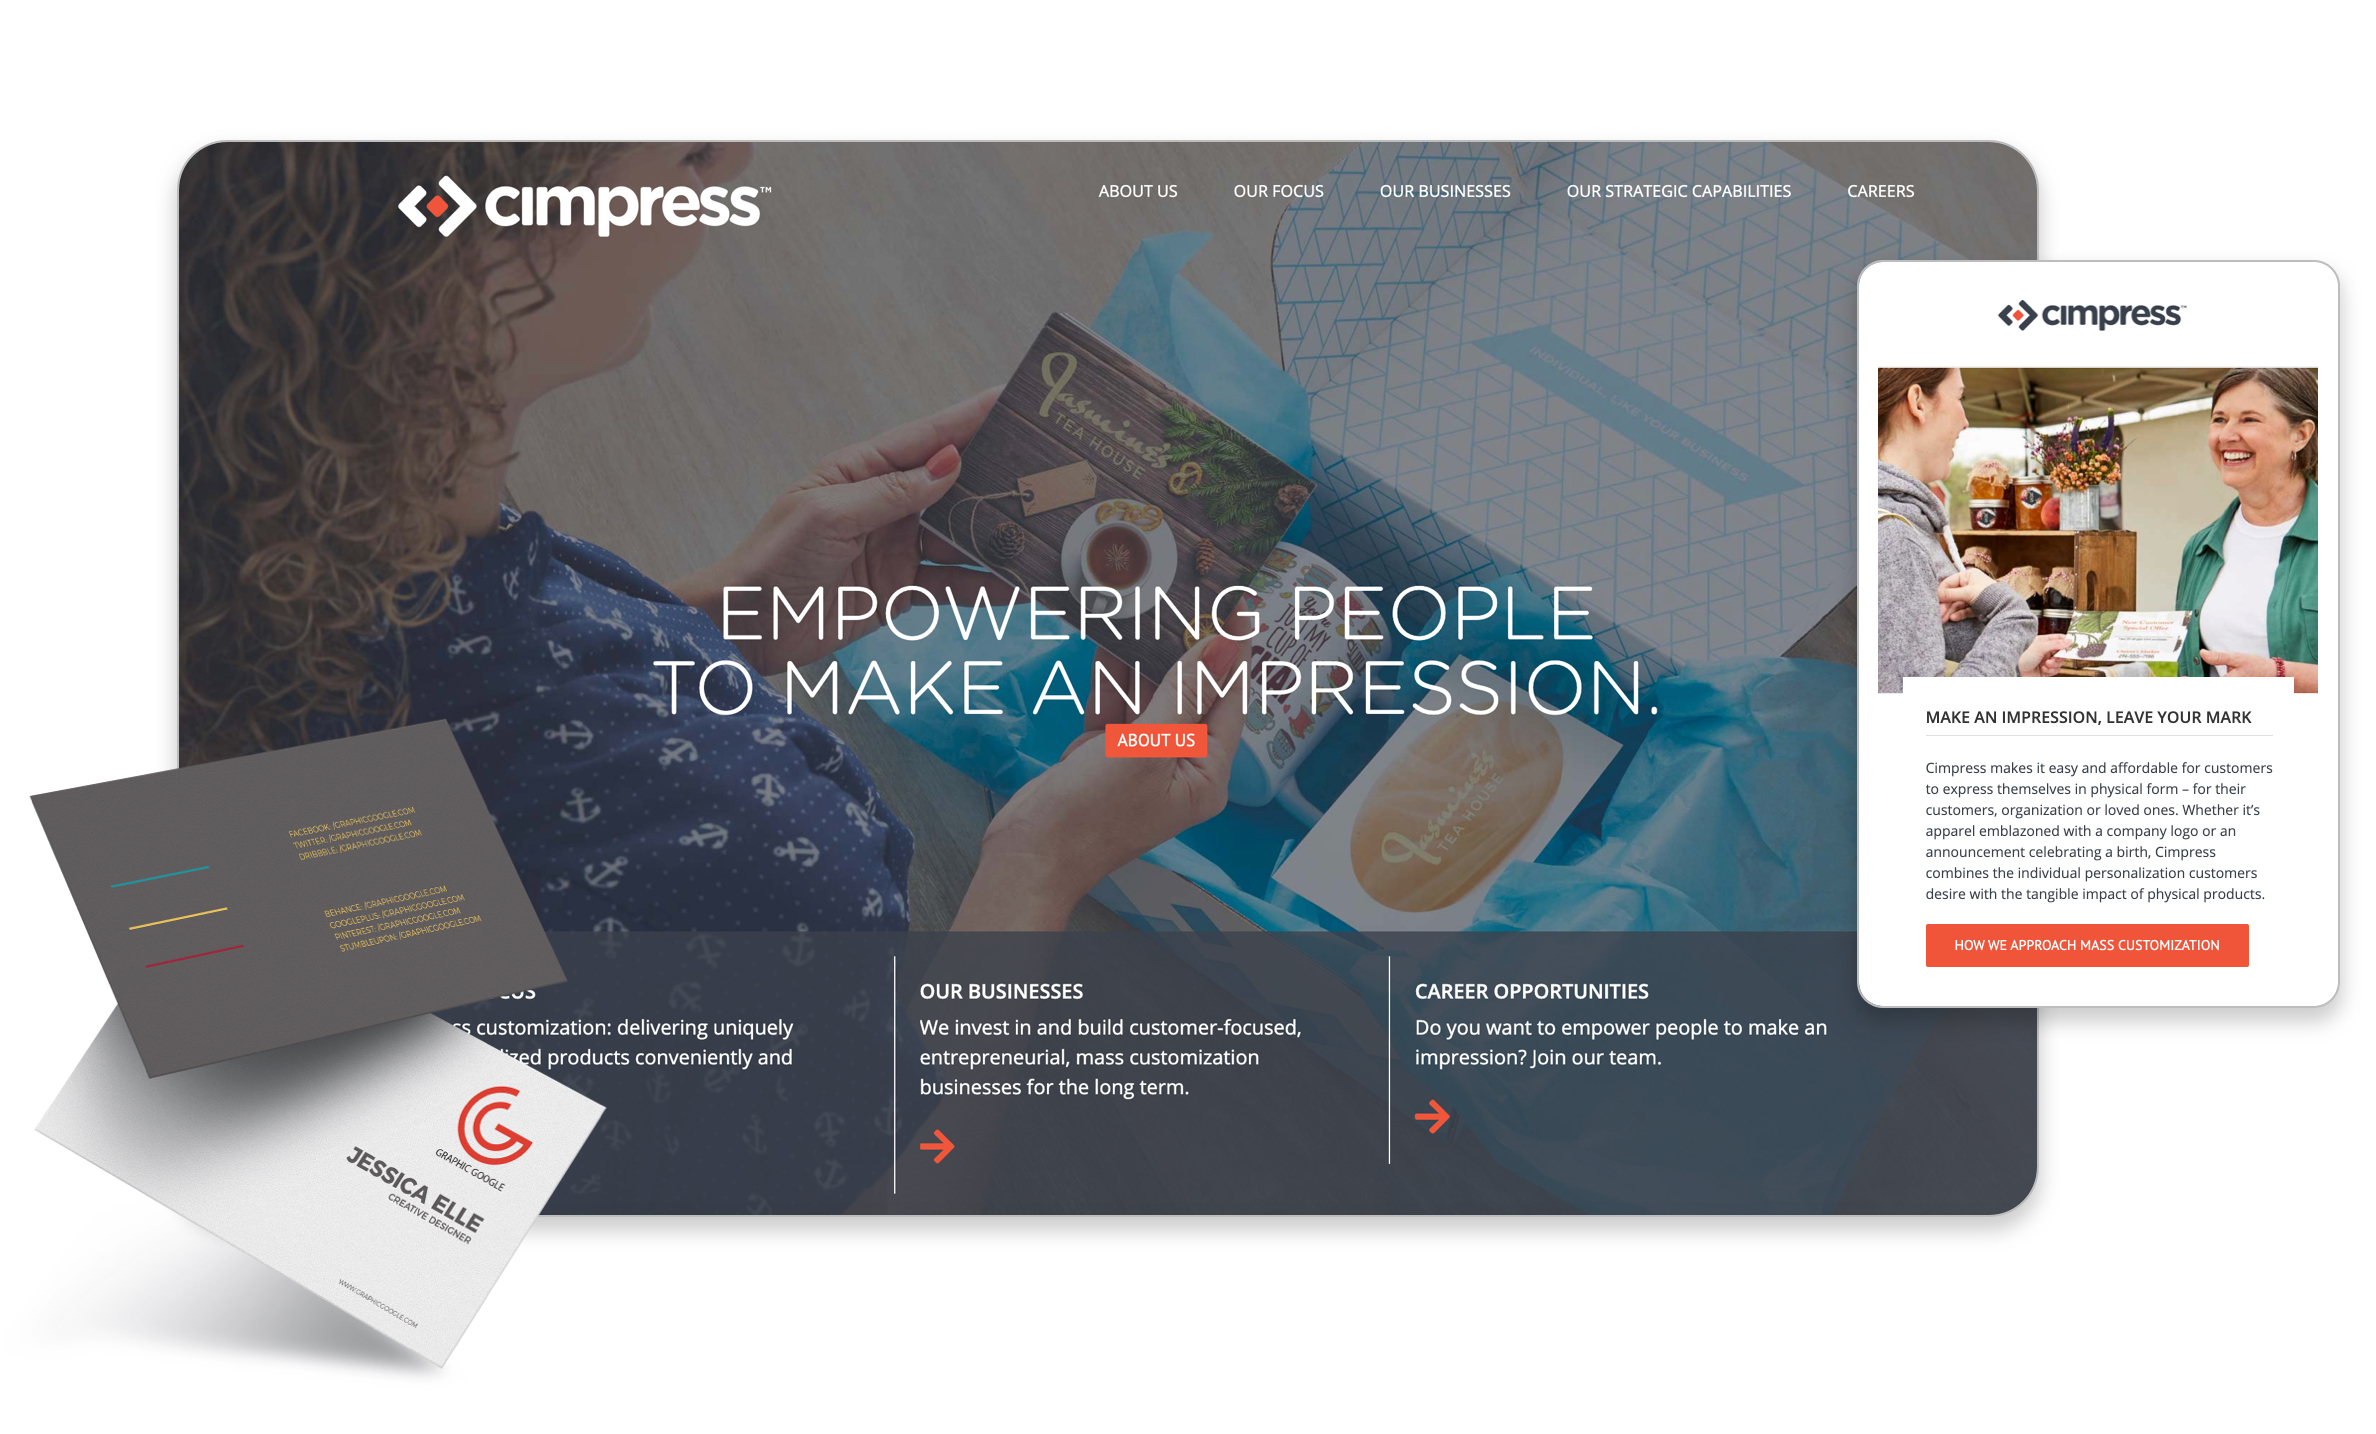 Cimpress's new digital commerce offers them more flexible approach to commerce and design